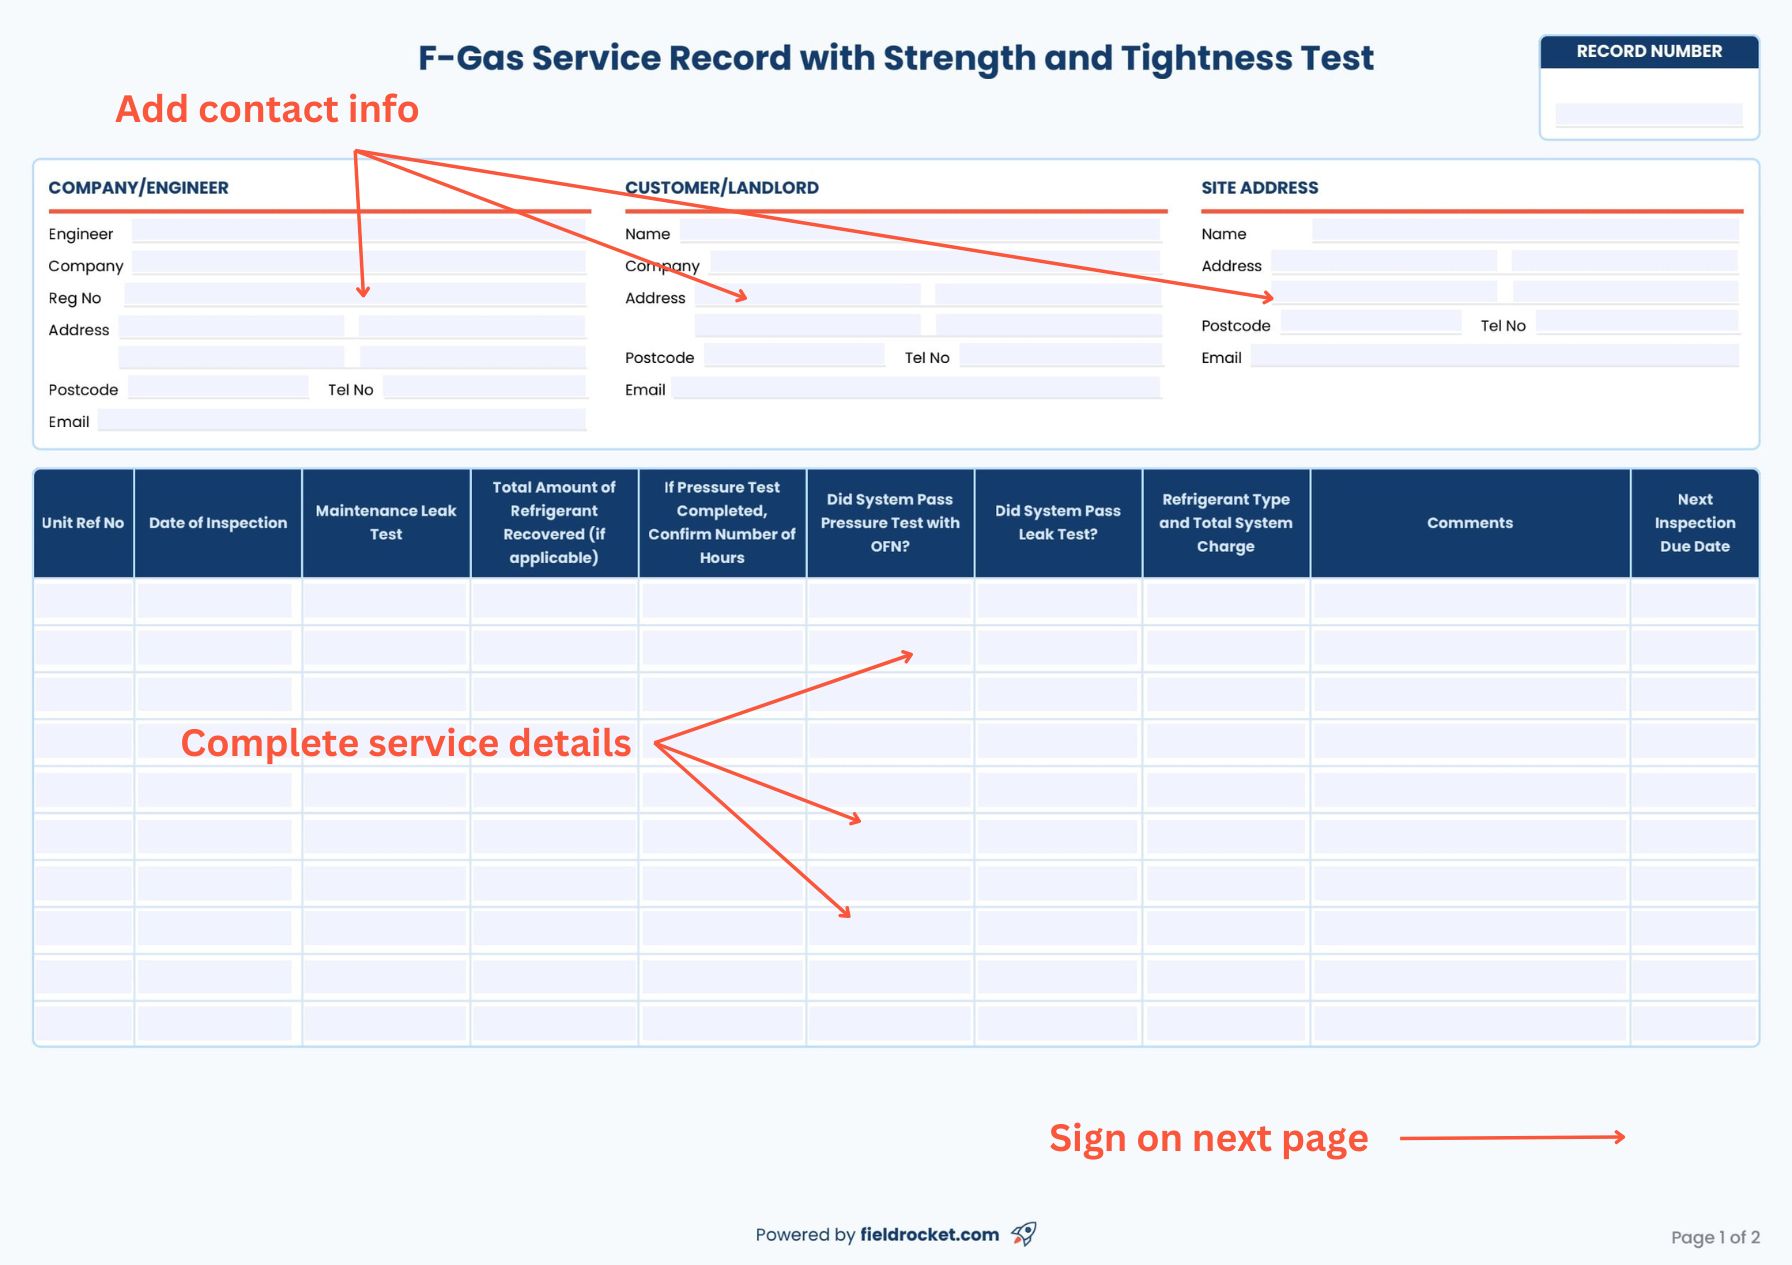 How to use our PDF F-gas service record template